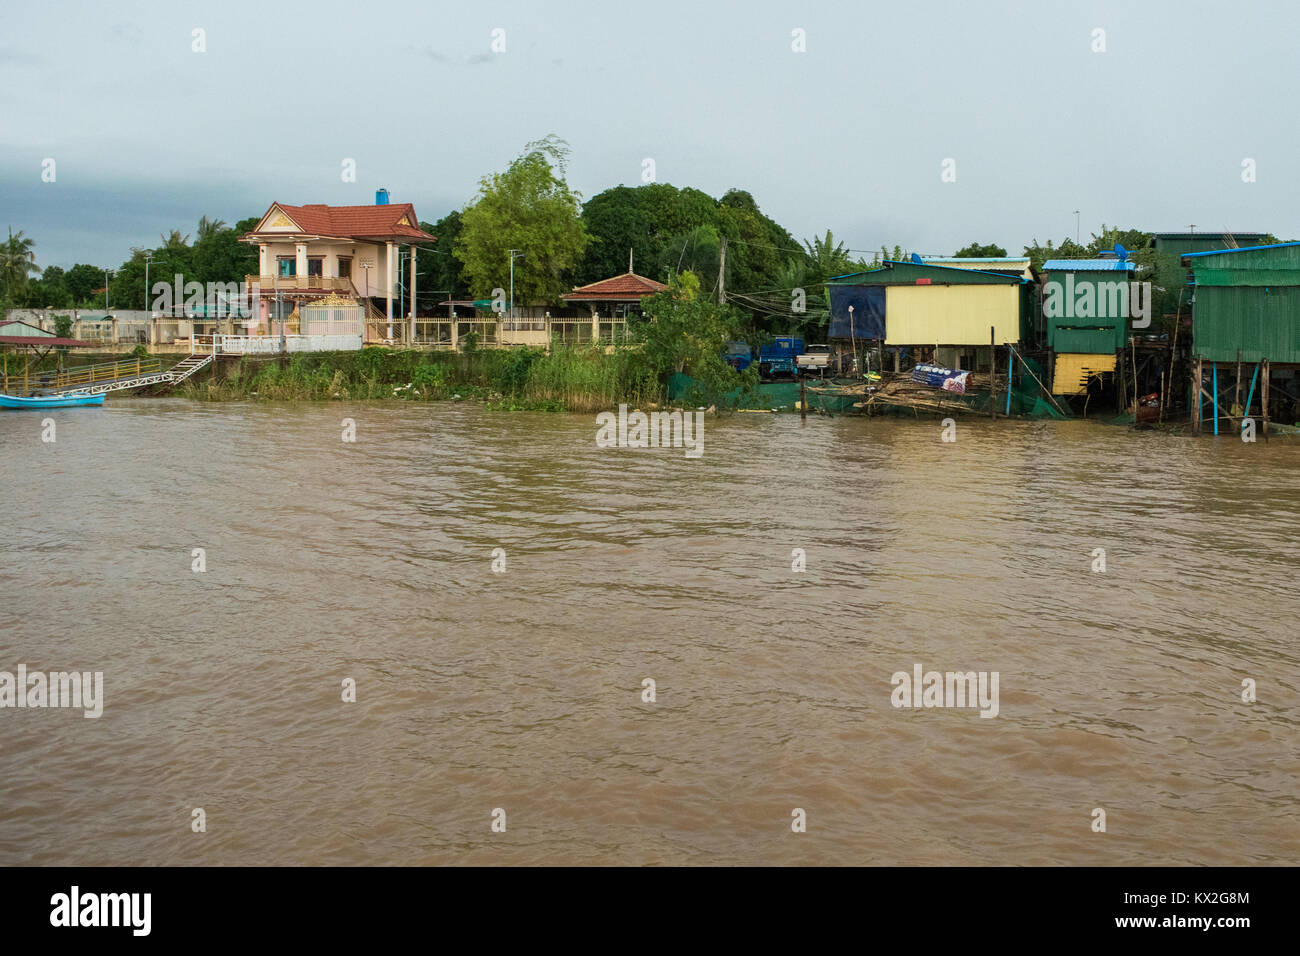 A beautiful rich house next to a slum shanty town of corrugated metal shacks on the river bank of the Mekong, close to Phnom PEnh, Cambodia, Asia Stock Photo